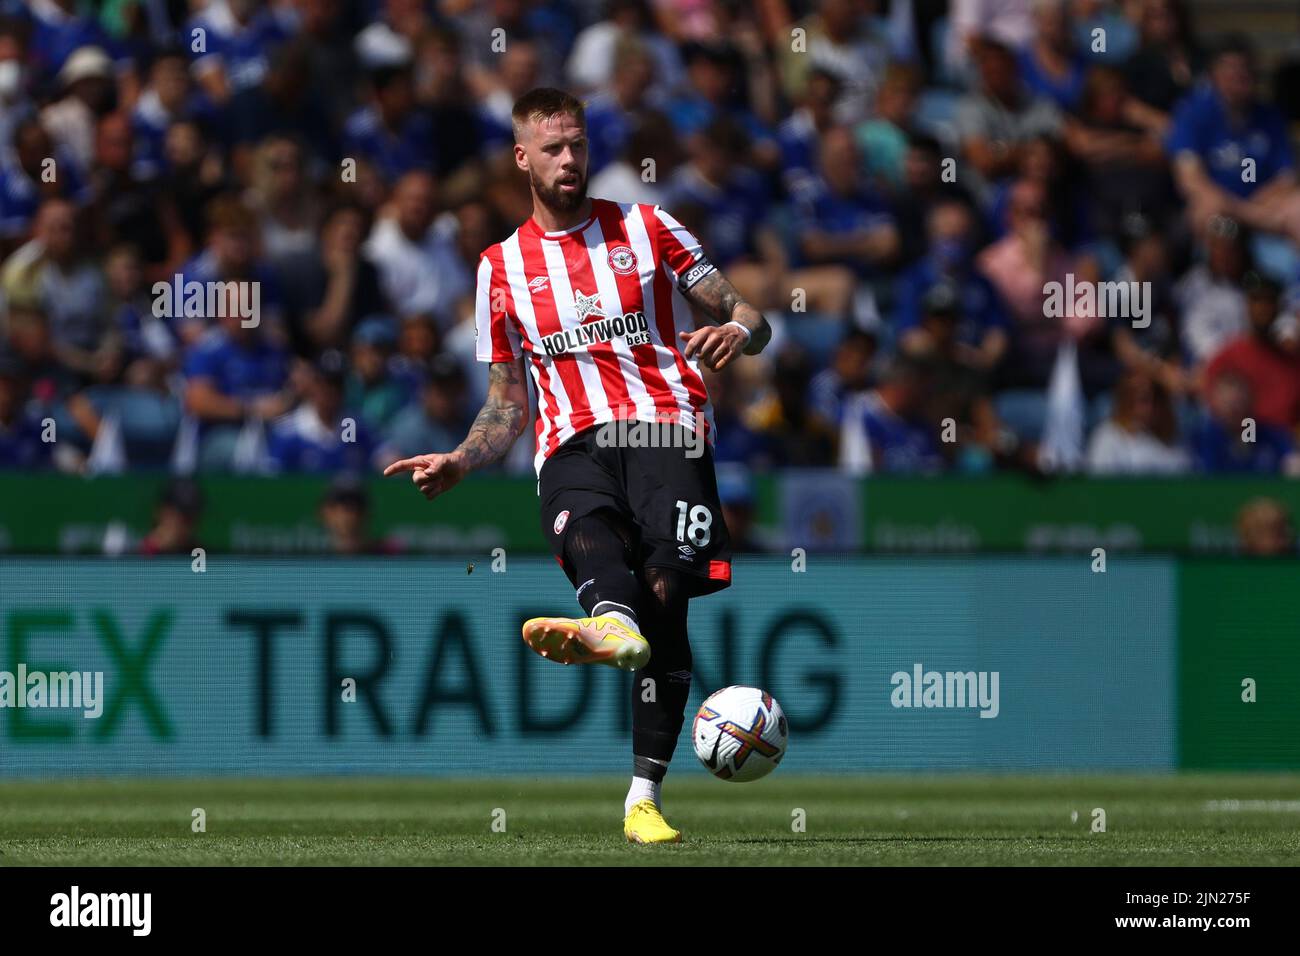 Pontus Jansson of Brentford - Leicester City v Brentford, Premier League, King Power Stadium, Leicester, UK - 7th August 2022  Editorial Use Only - DataCo restrictions apply Stock Photo